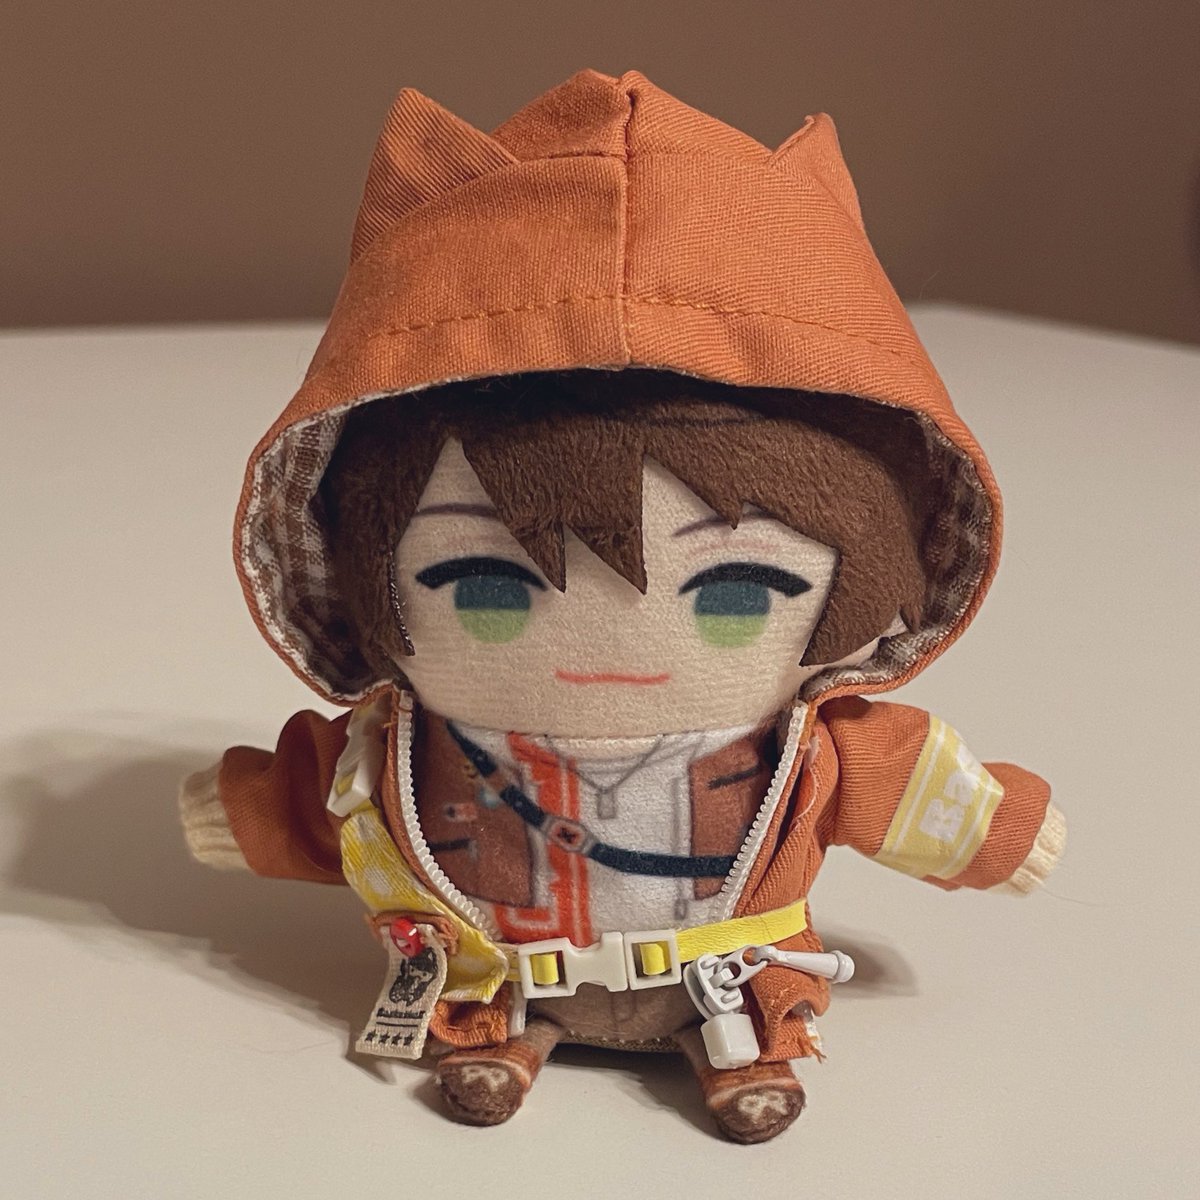 I JUST REMEMBERED I BOUGHT THIS CUTE LITTLE FOX HOODIE FOR THE NENDOROID DOLL I WAS PLANNING TO MAKE (which i still havent finished btw bc sculpting the hair scares me) AND AAAAAAAA I WANNA EAT HIM HE'S SO CUTE 😭😭😭